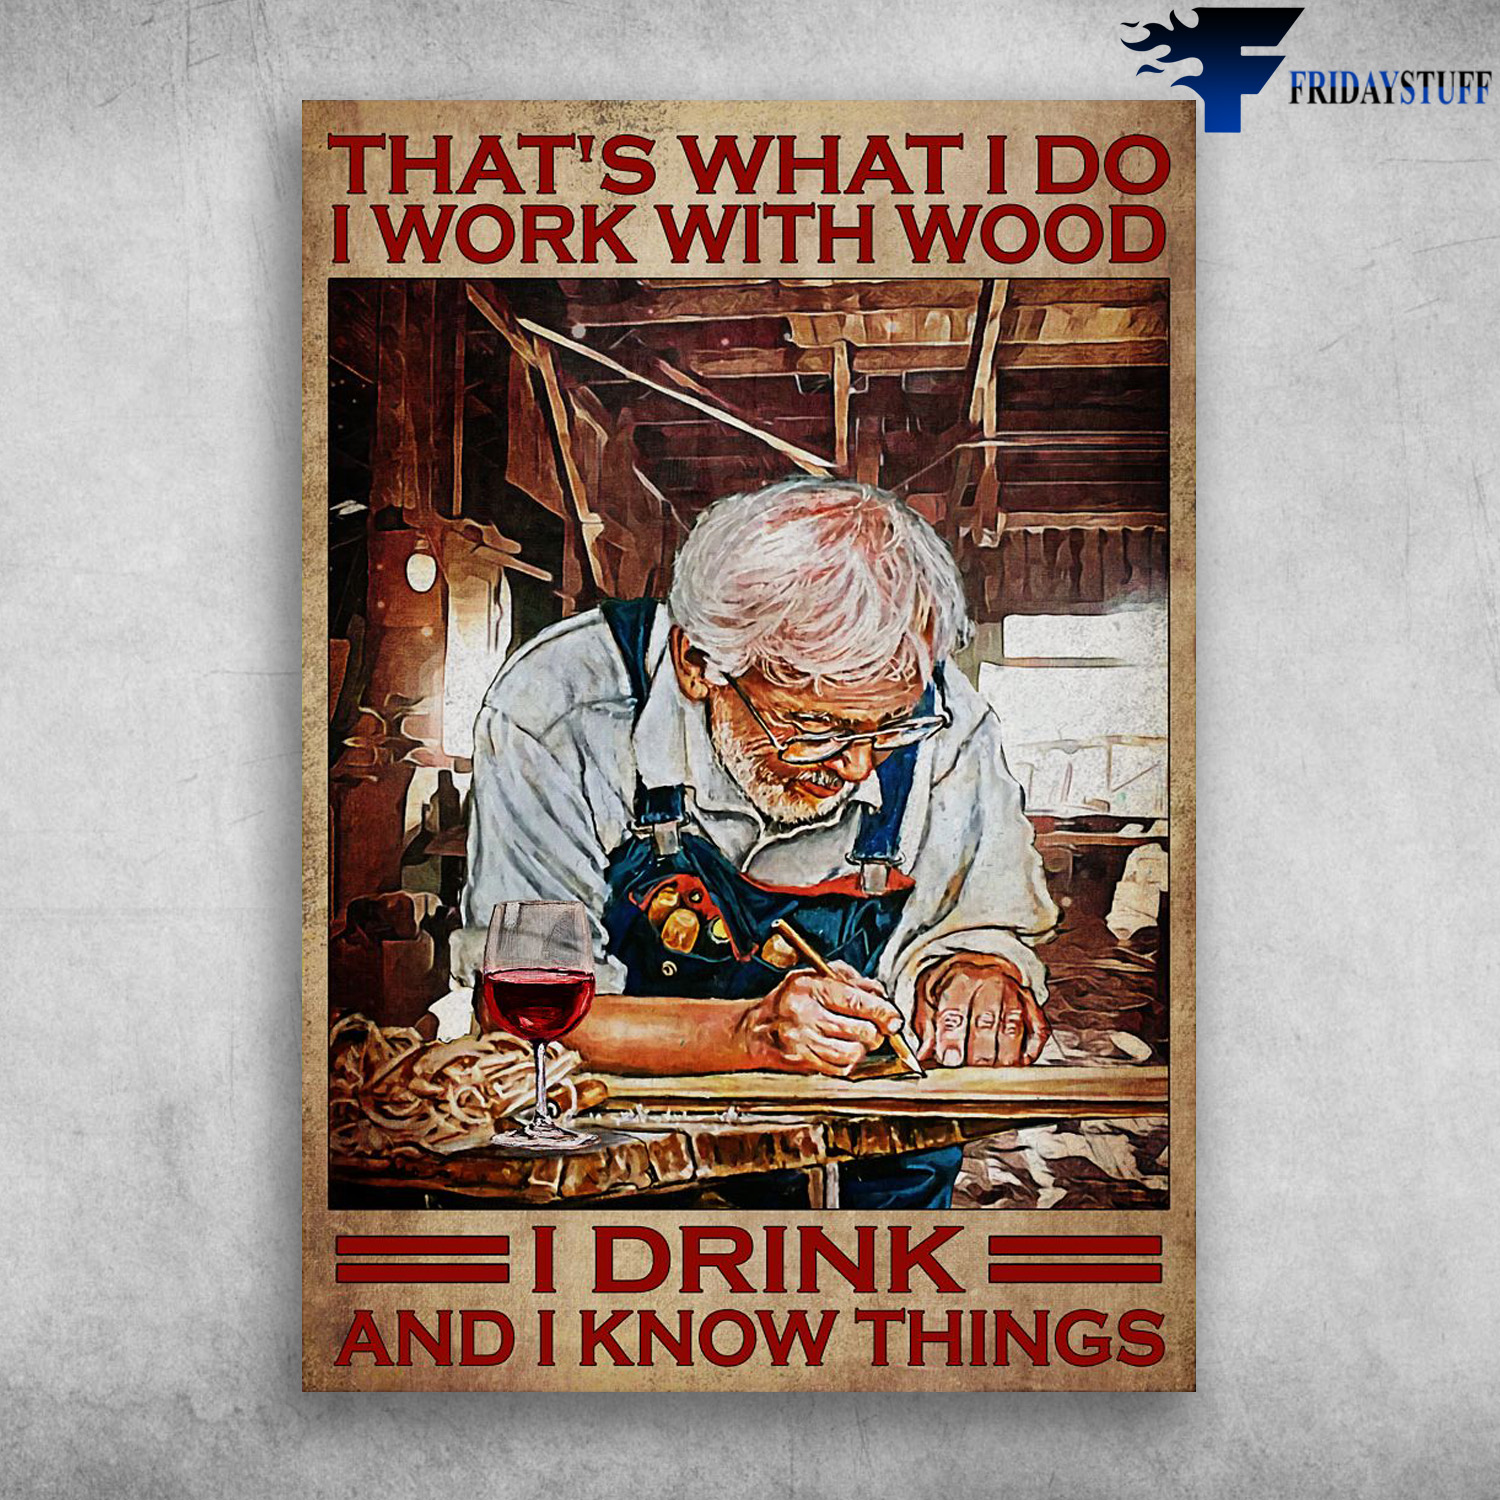 Old Carpenter - That's What I Do, I Work With Wood, I Drink, And I Know Things